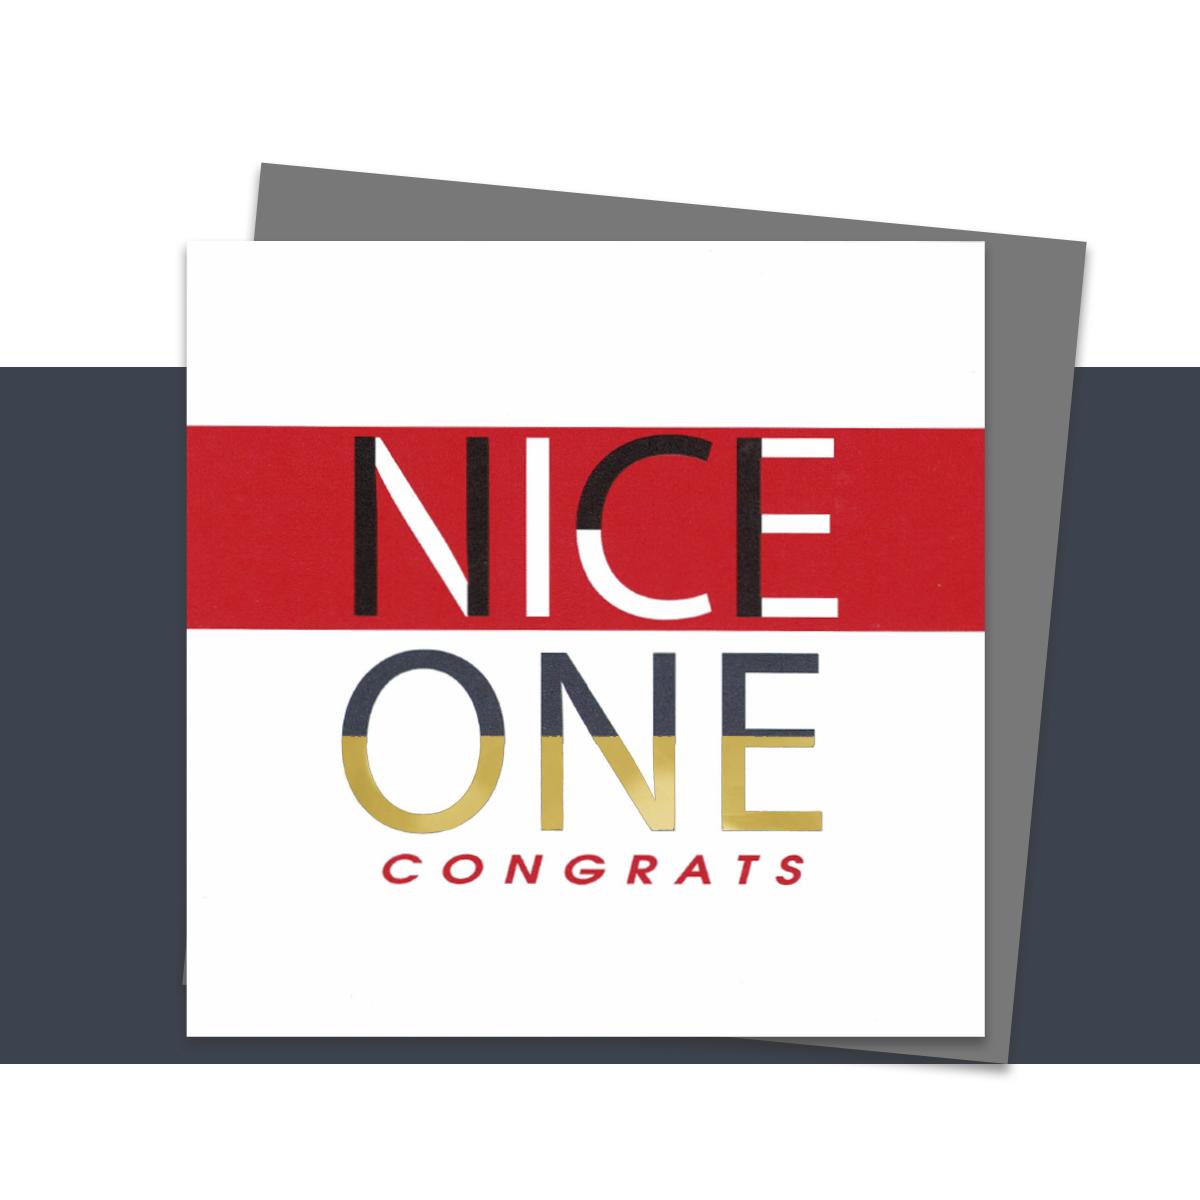 Nice One Congrats Greeting Card Alongside Its Silver Grey Envelope